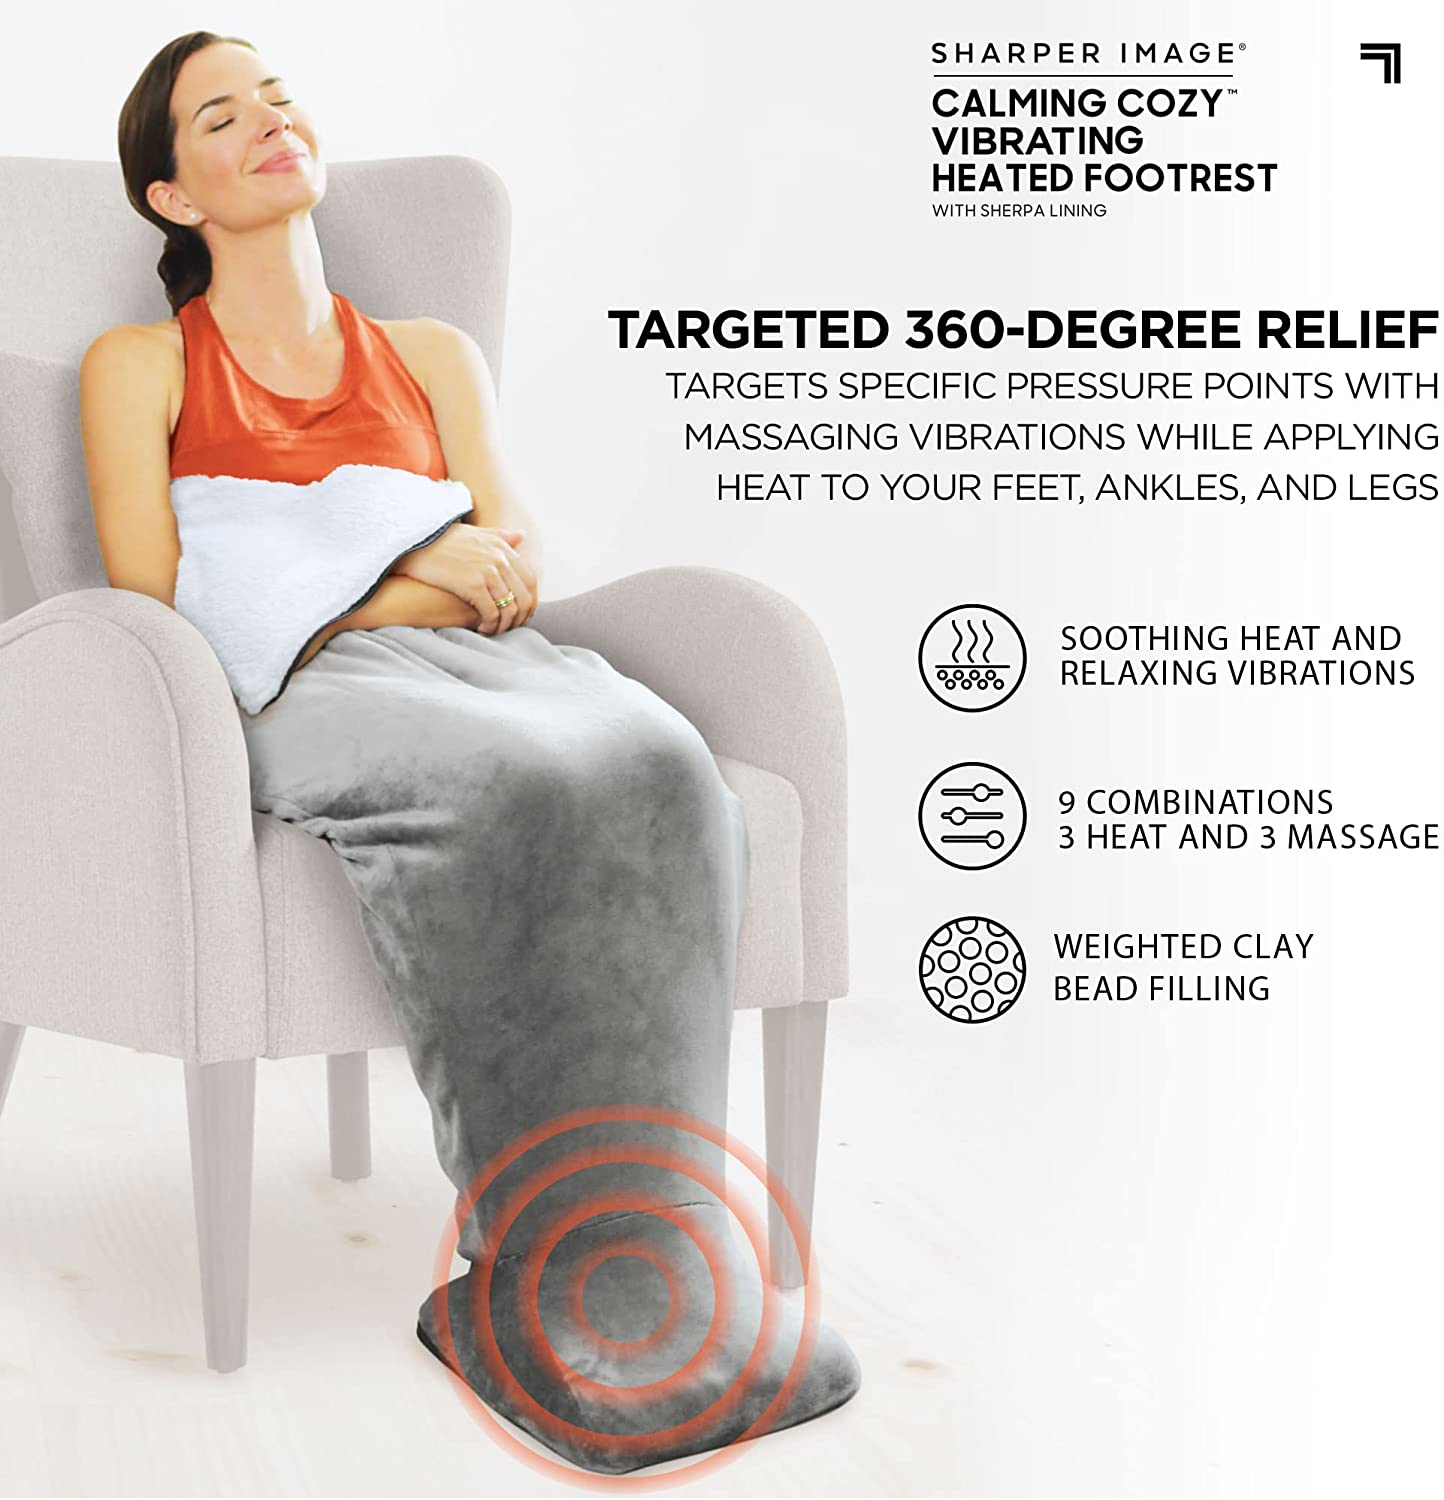 Heated Footrest